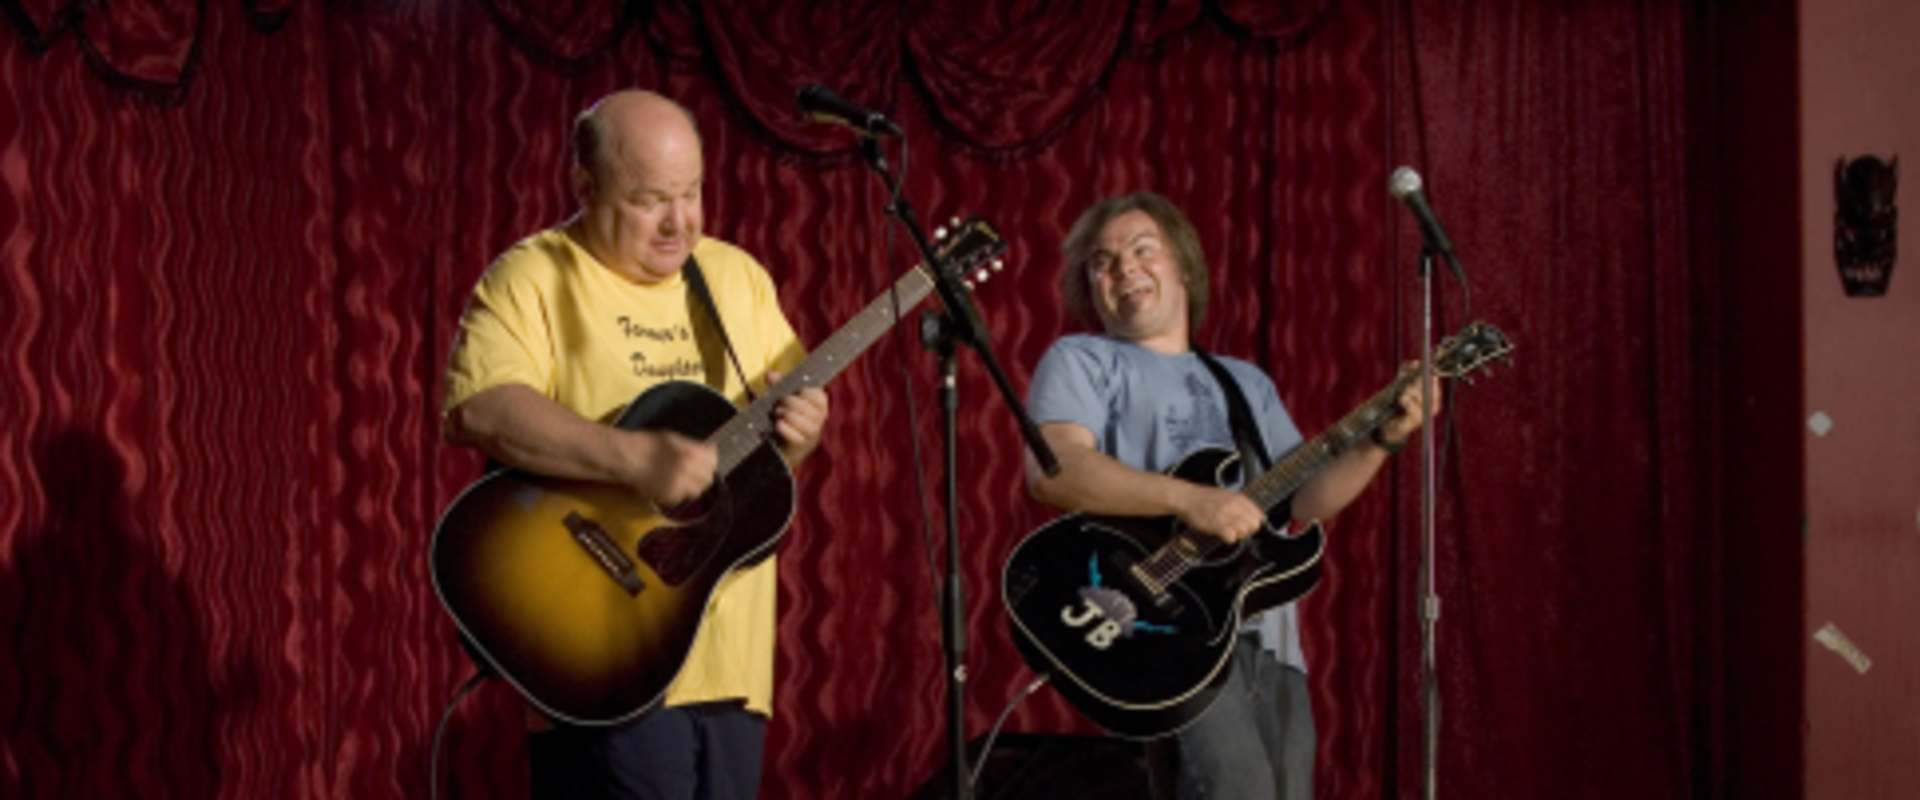 Tenacious D in The Pick of Destiny background 2